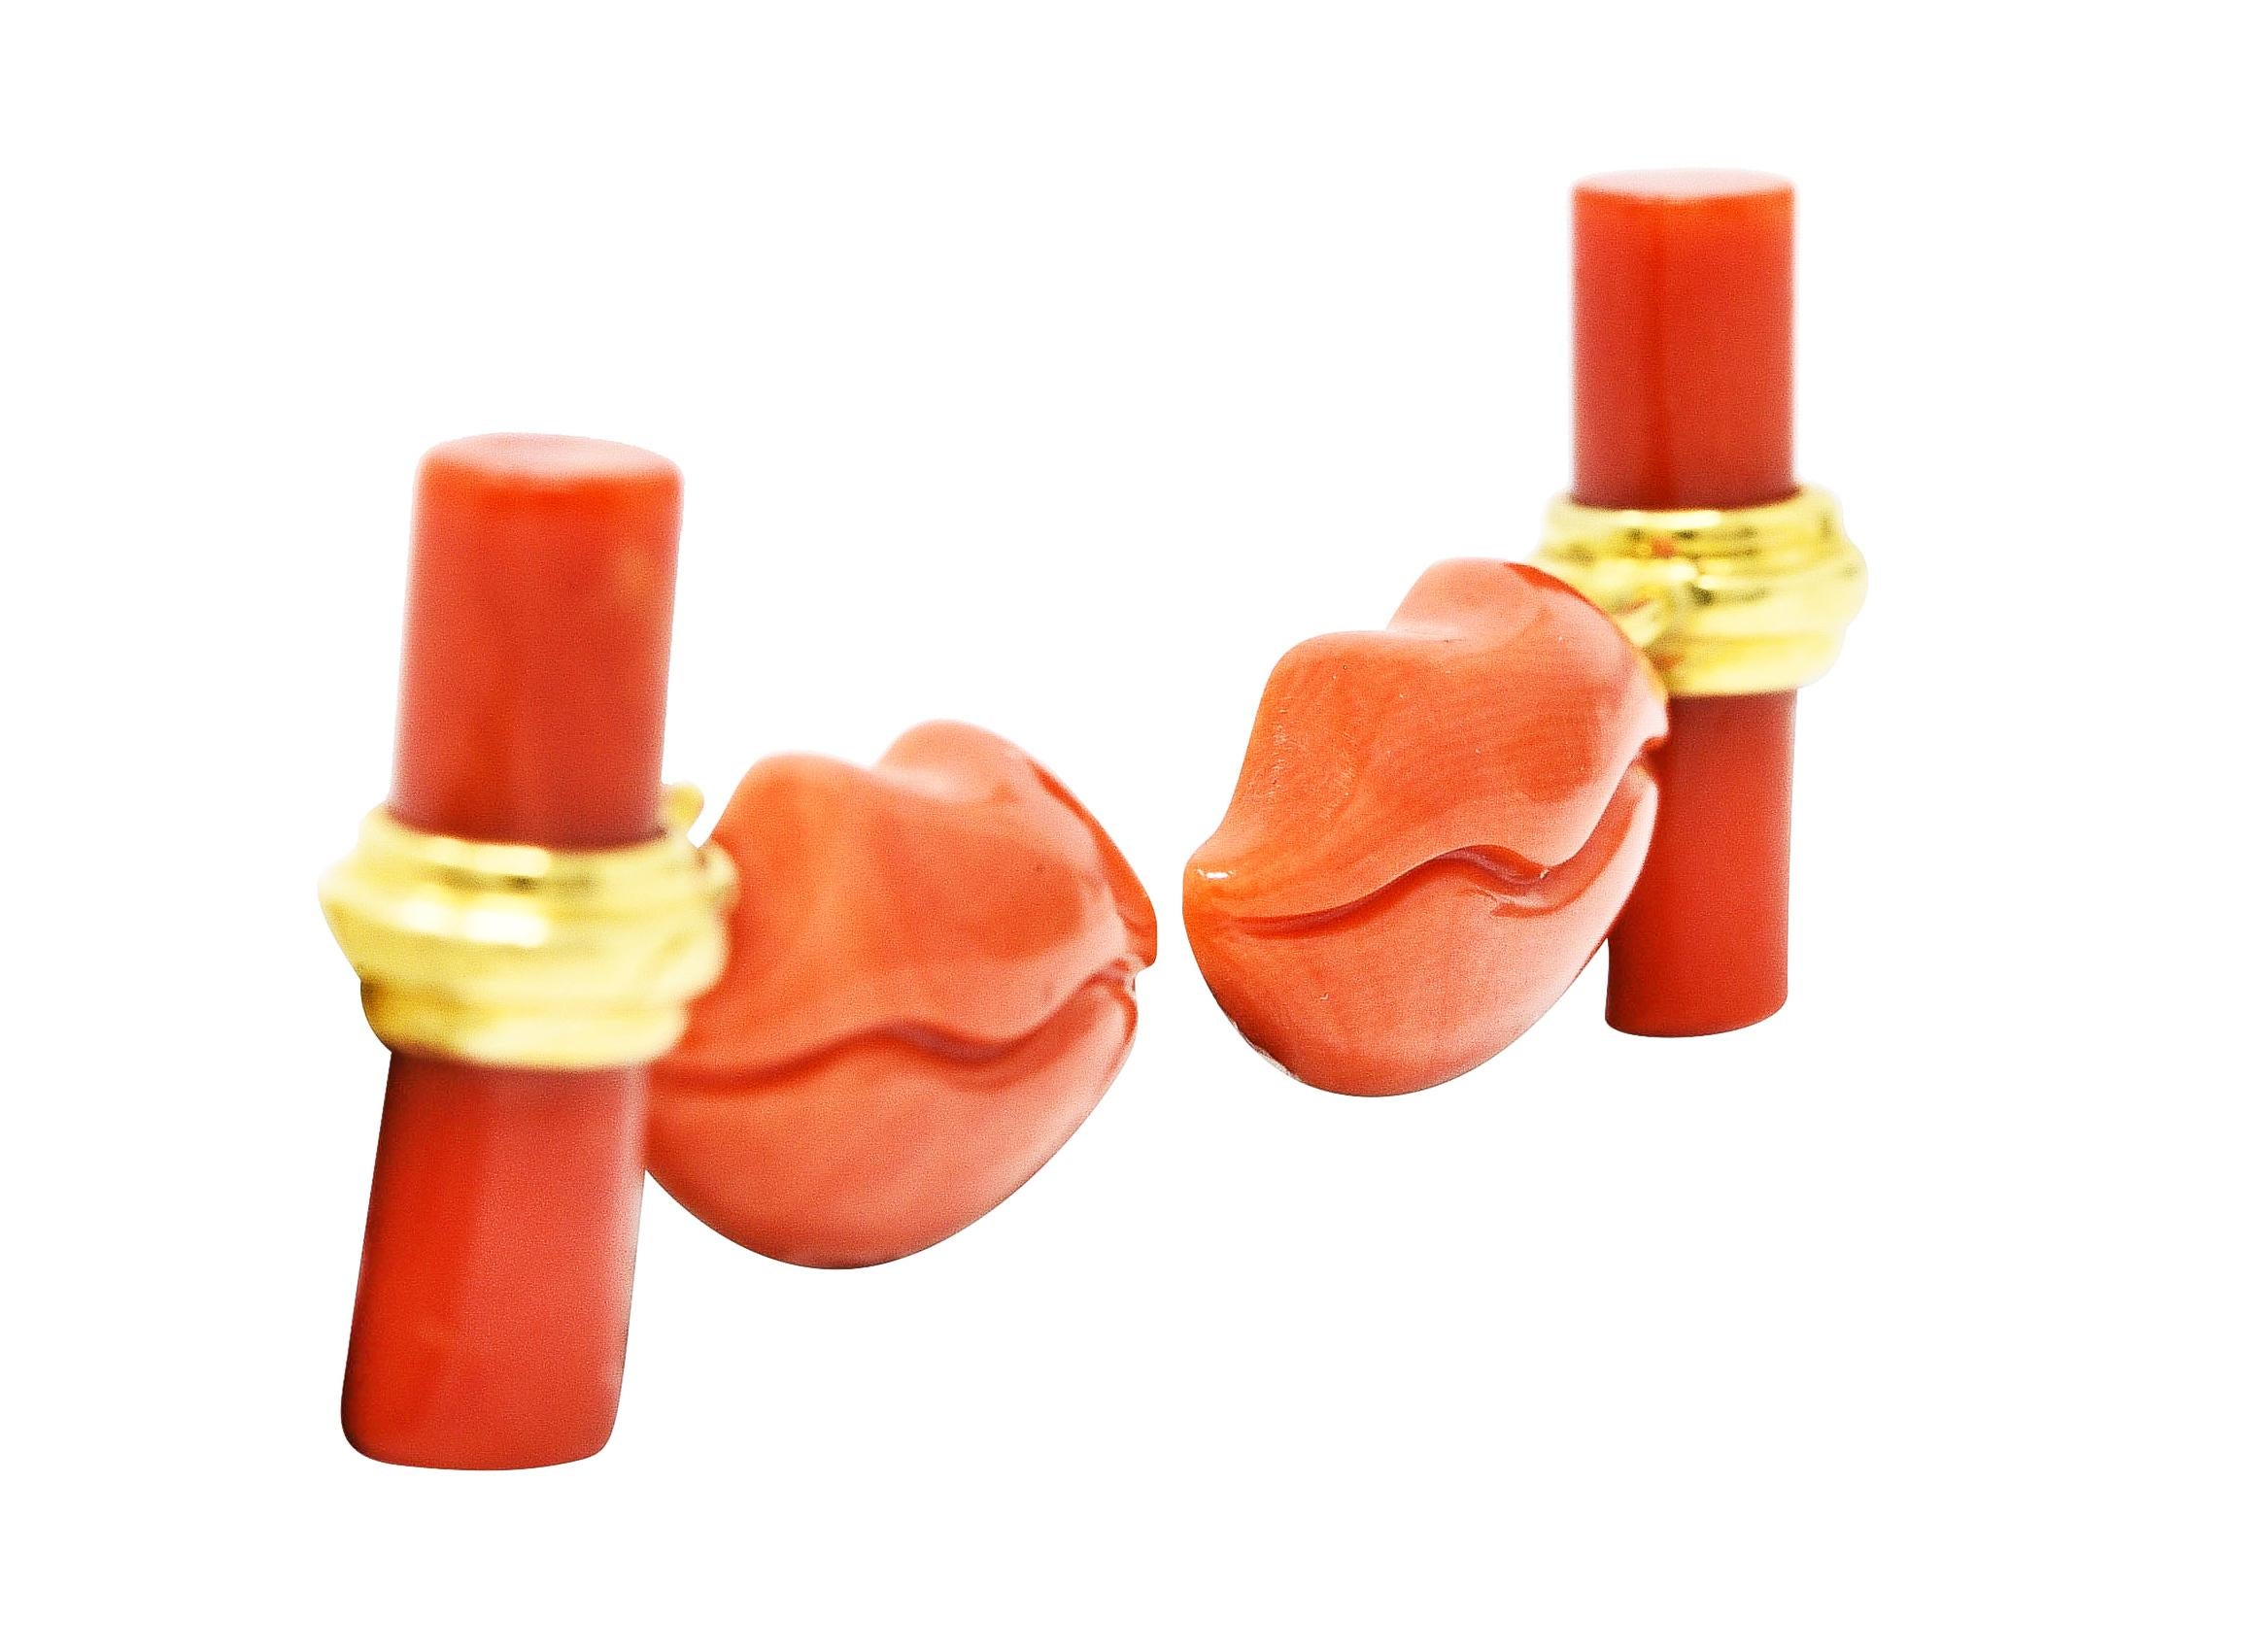 Link style cufflinks terminate as carved coral lips and cylinders at each end. Opaque light to medium reddish-orange with white mottling. With grooved gold loop around cylindrical coral form. Tested as 18 karat gold. Circa: 1960's. Total length: 1